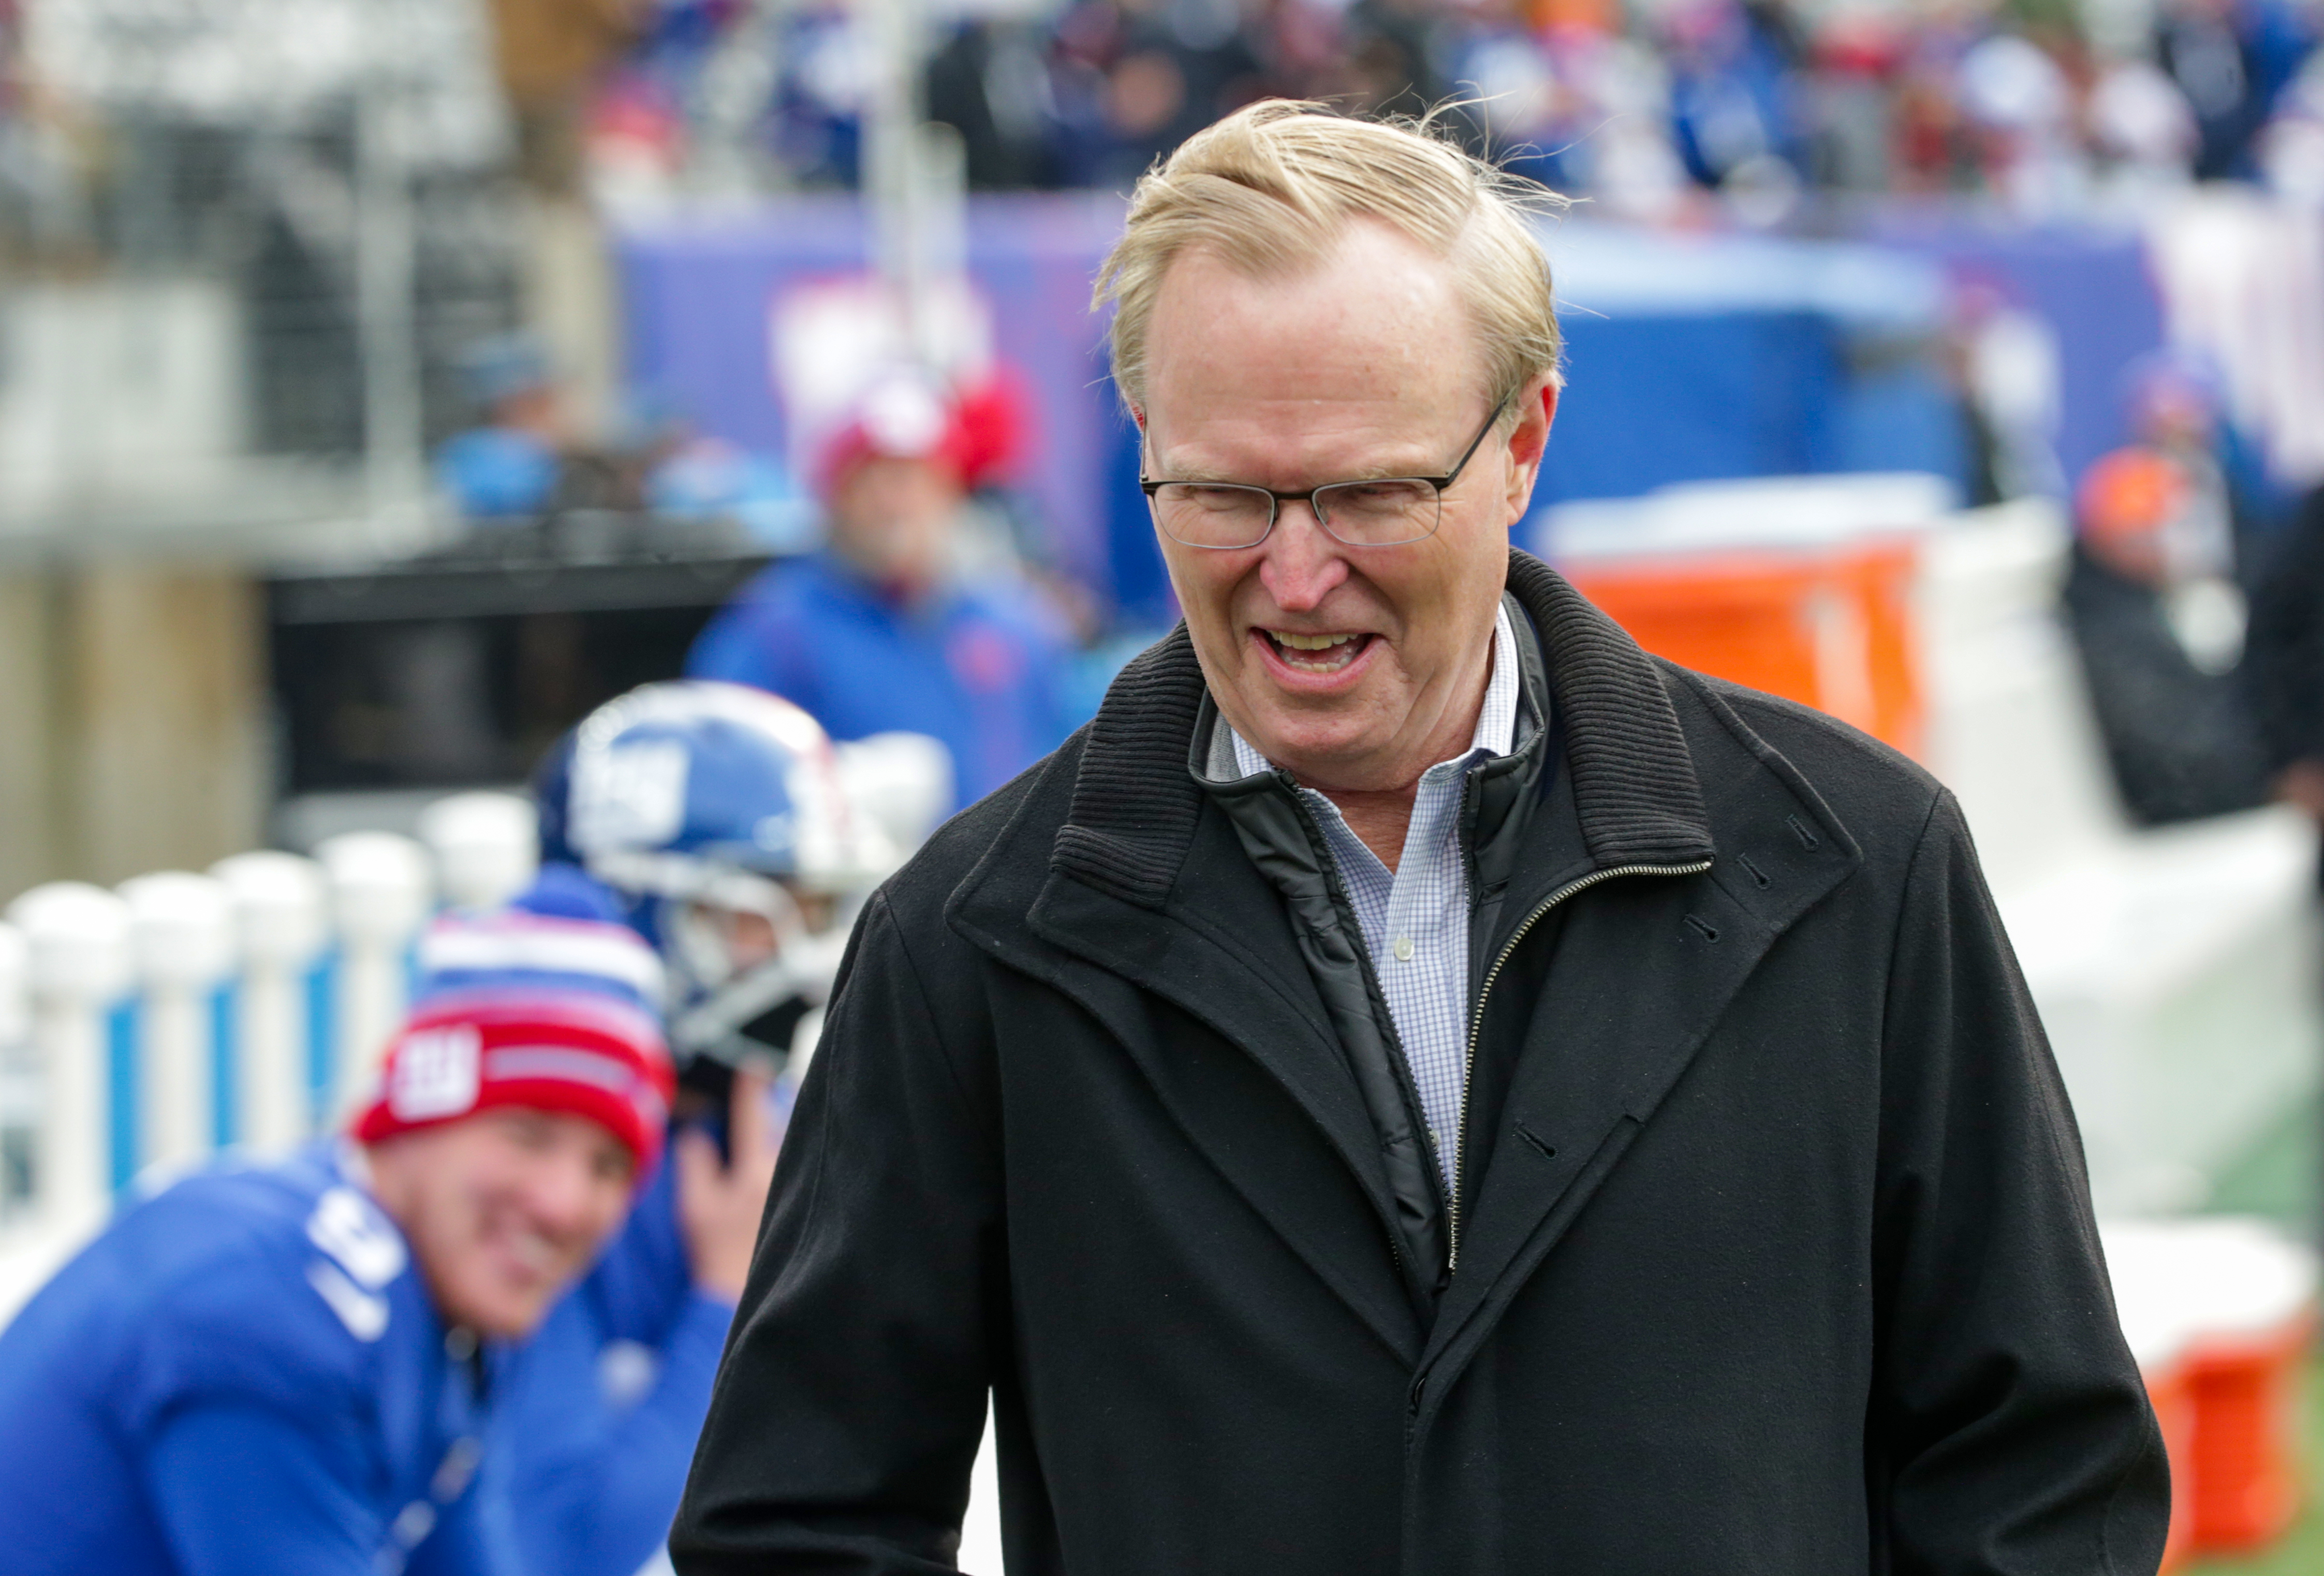 New York Giants owner John Mara during pregame warmups as the Giants prepare to host the Washington Football Team on Sunday, Jan. 9, 2022 in East Rutherford, N.J.